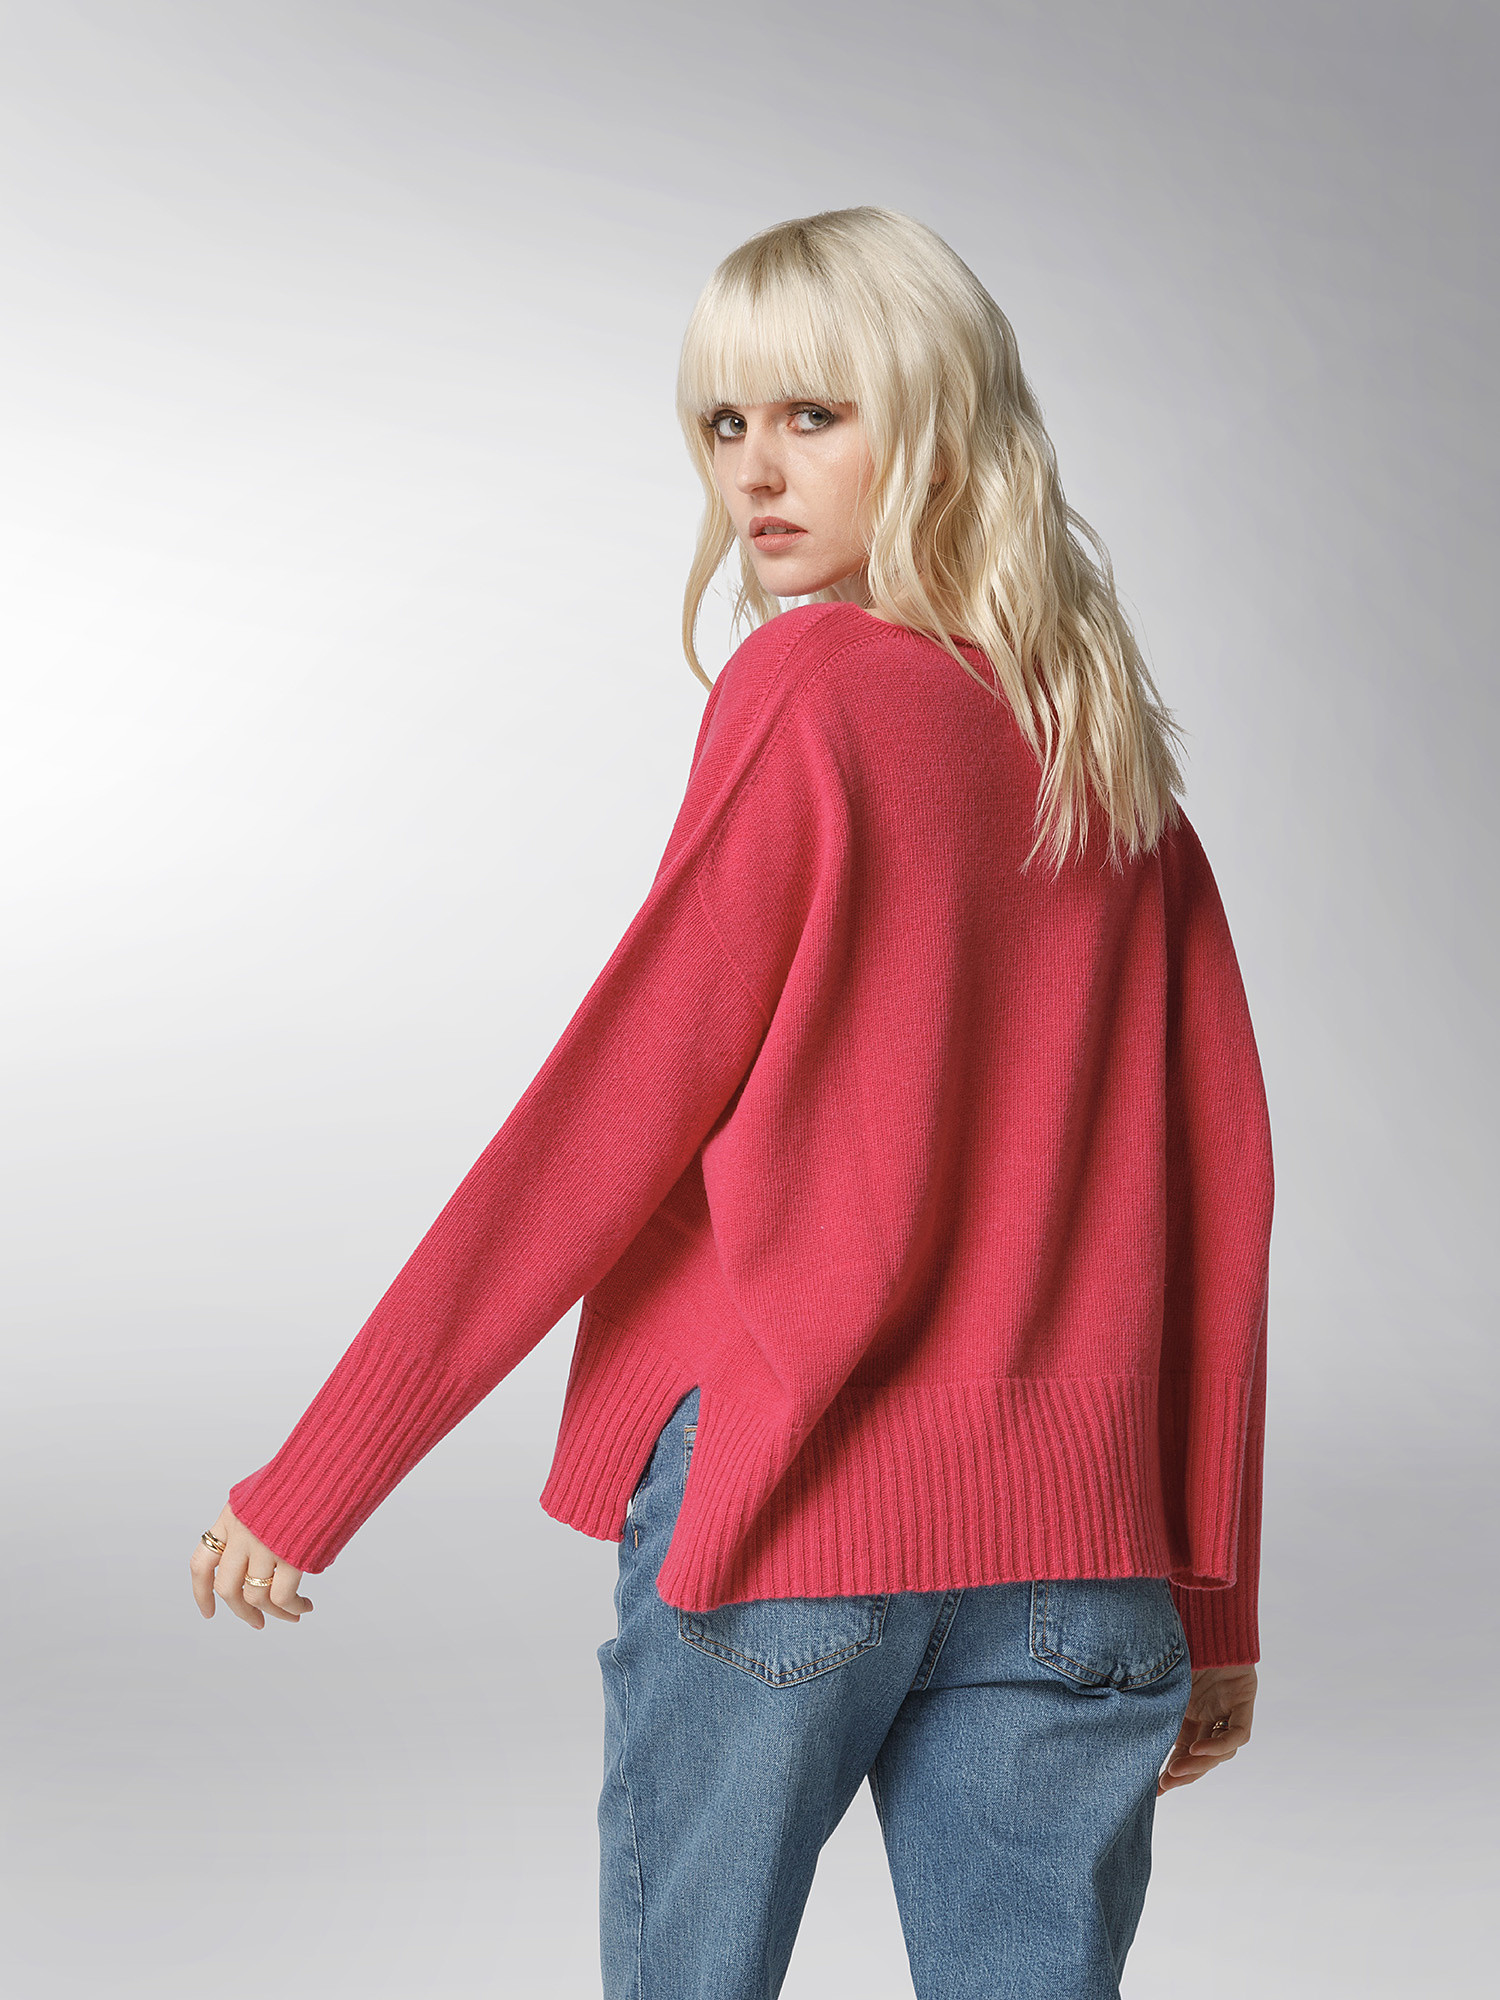 K Collection - Carded wool pullover, Pink Fuchsia, large image number 4